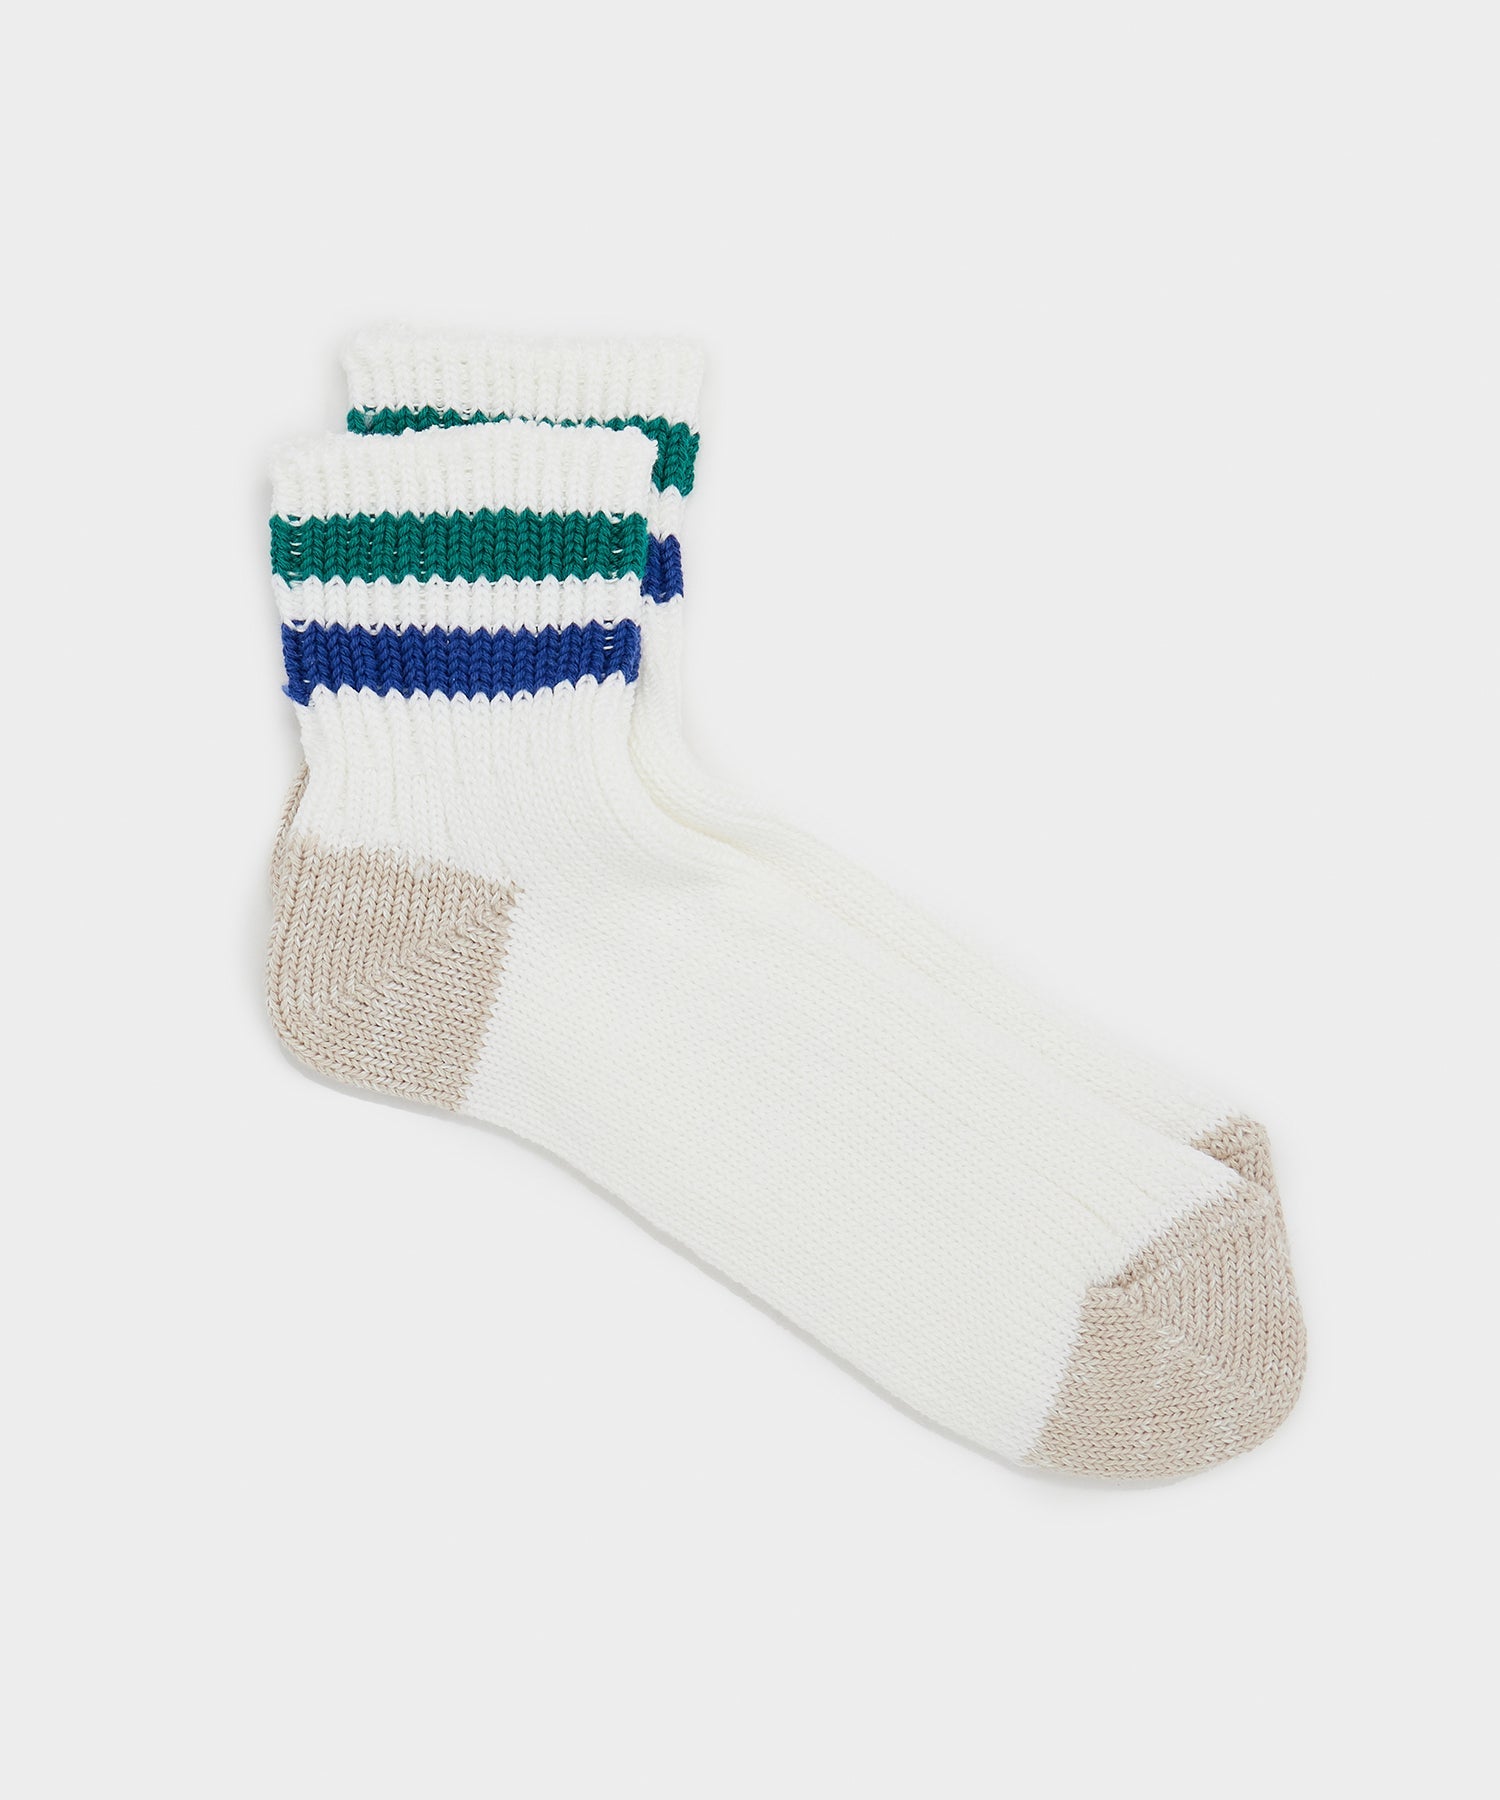 Rototo Old School Ankle Sock in Green/Blue